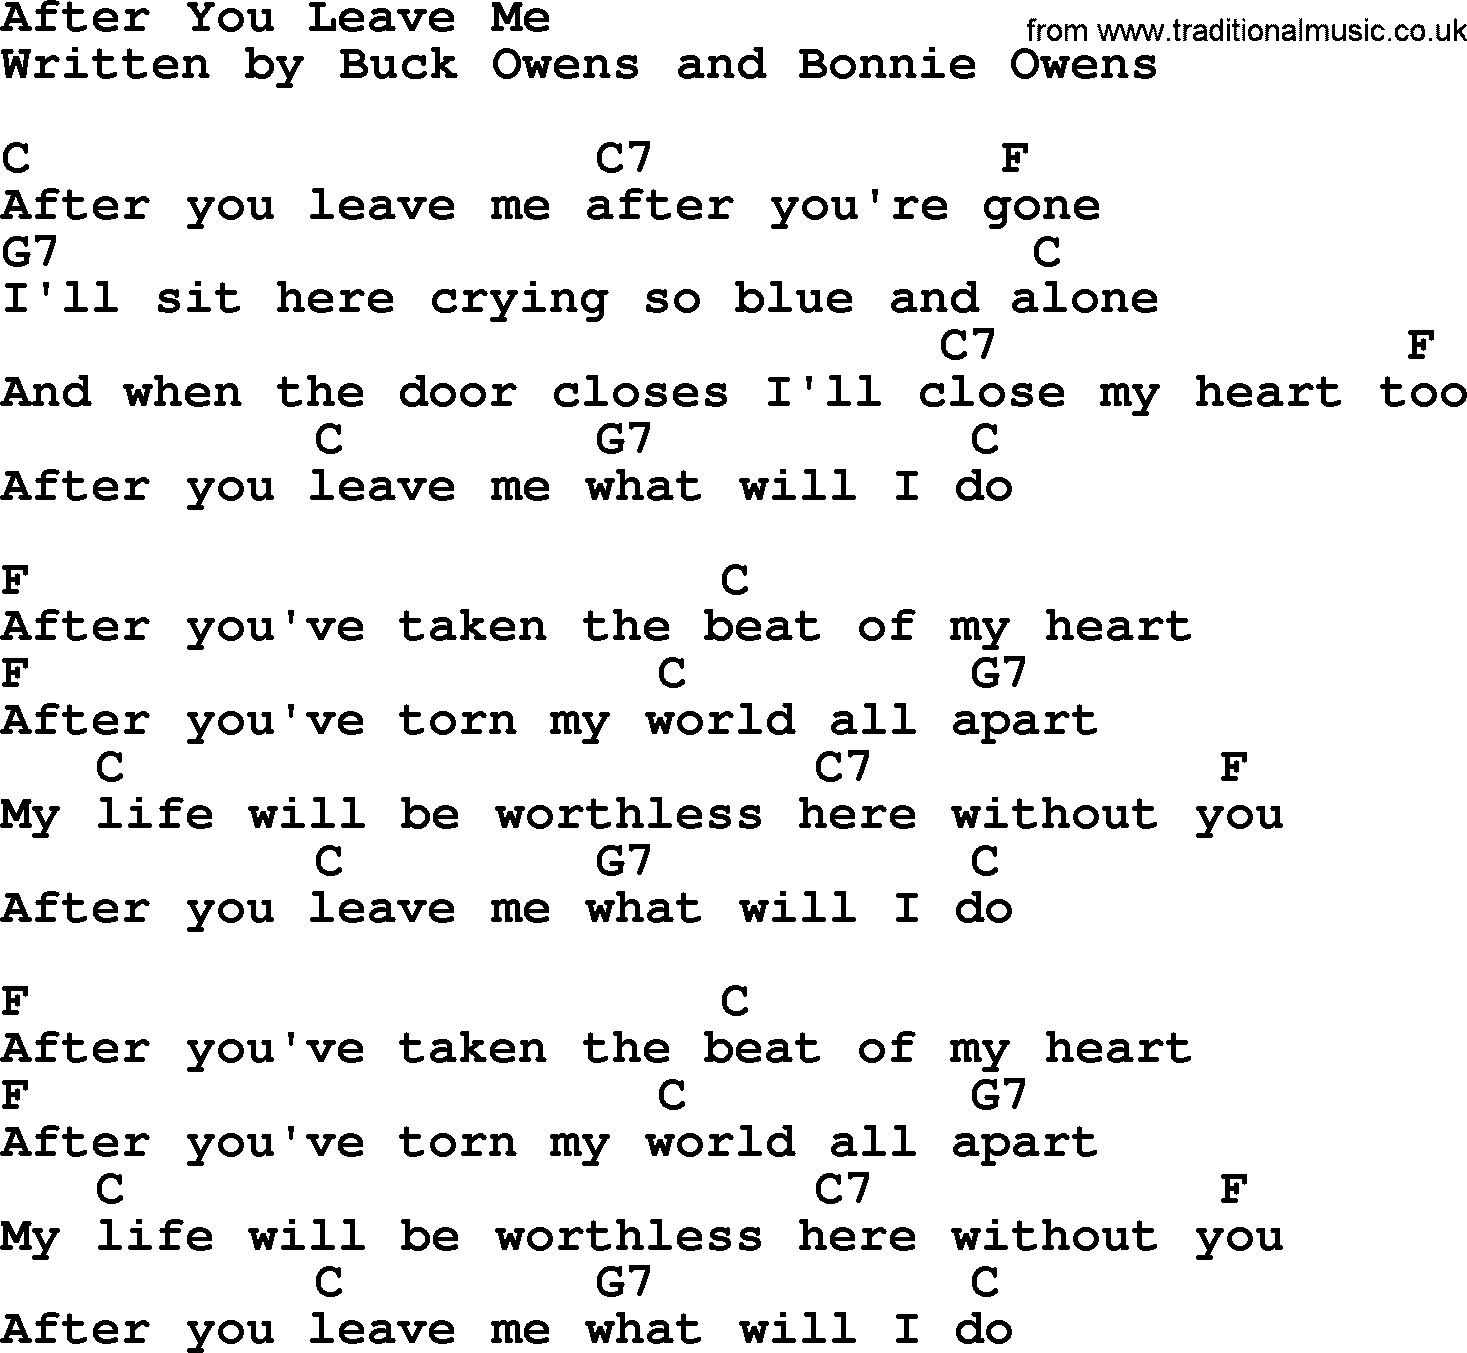 Bluegrass song: After You Leave Me, lyrics and chords